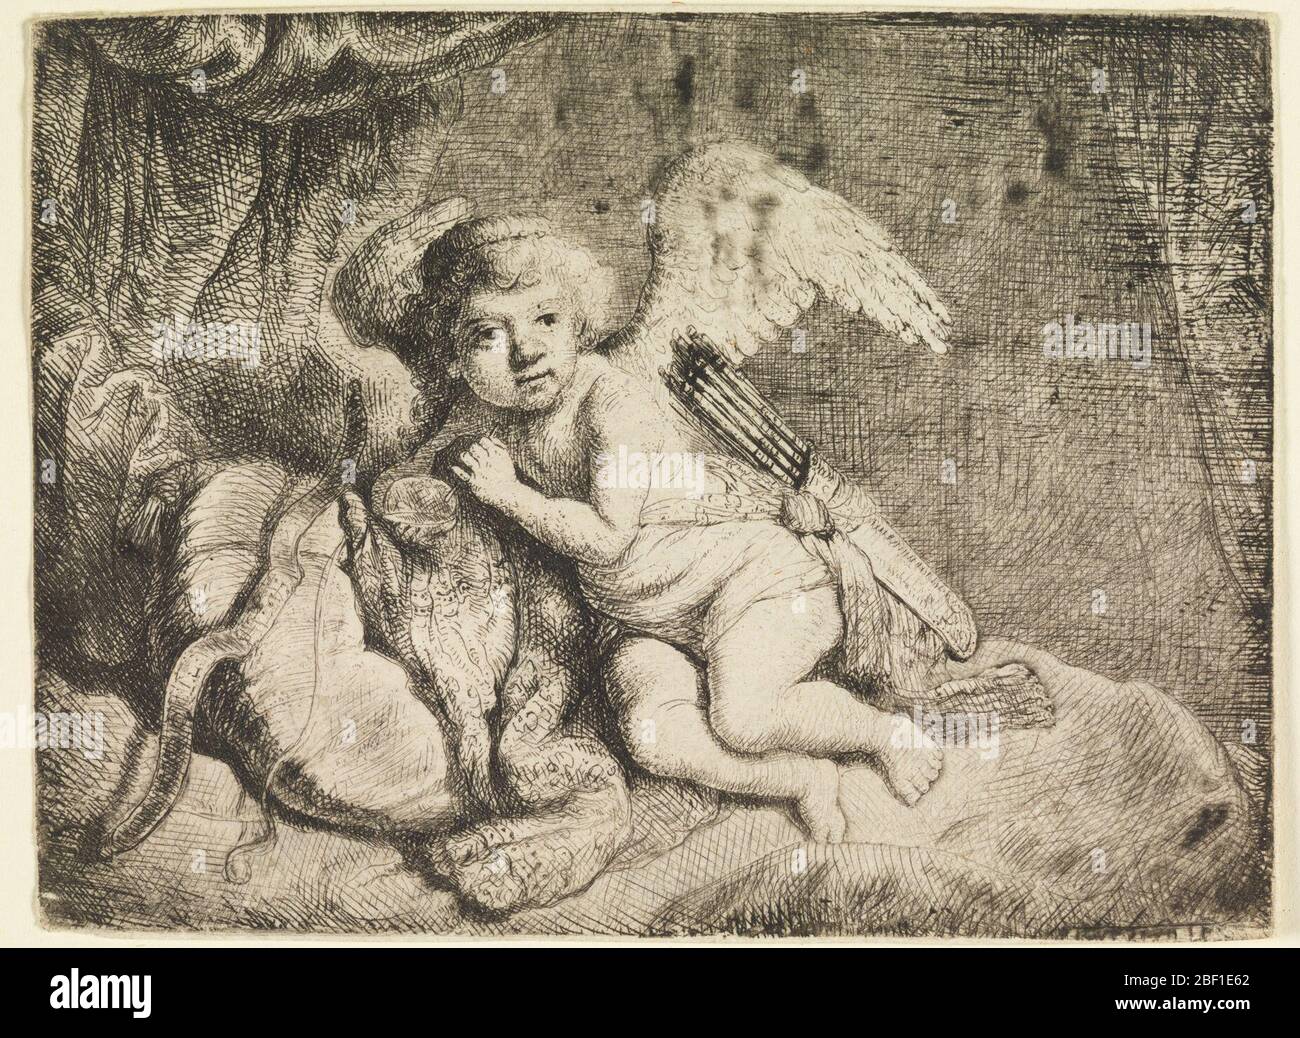 Cupid Resting after a painting formerly attributed to Rembrandt. A winged cupid, his quiver of arrows at his left side, reclines on a couch. His bow at left. After a painting in the Thyssen collection, signed and dated 'Rembrandt 1634.) Neither painting nor print are presently given to Rembrandt. Stock Photo